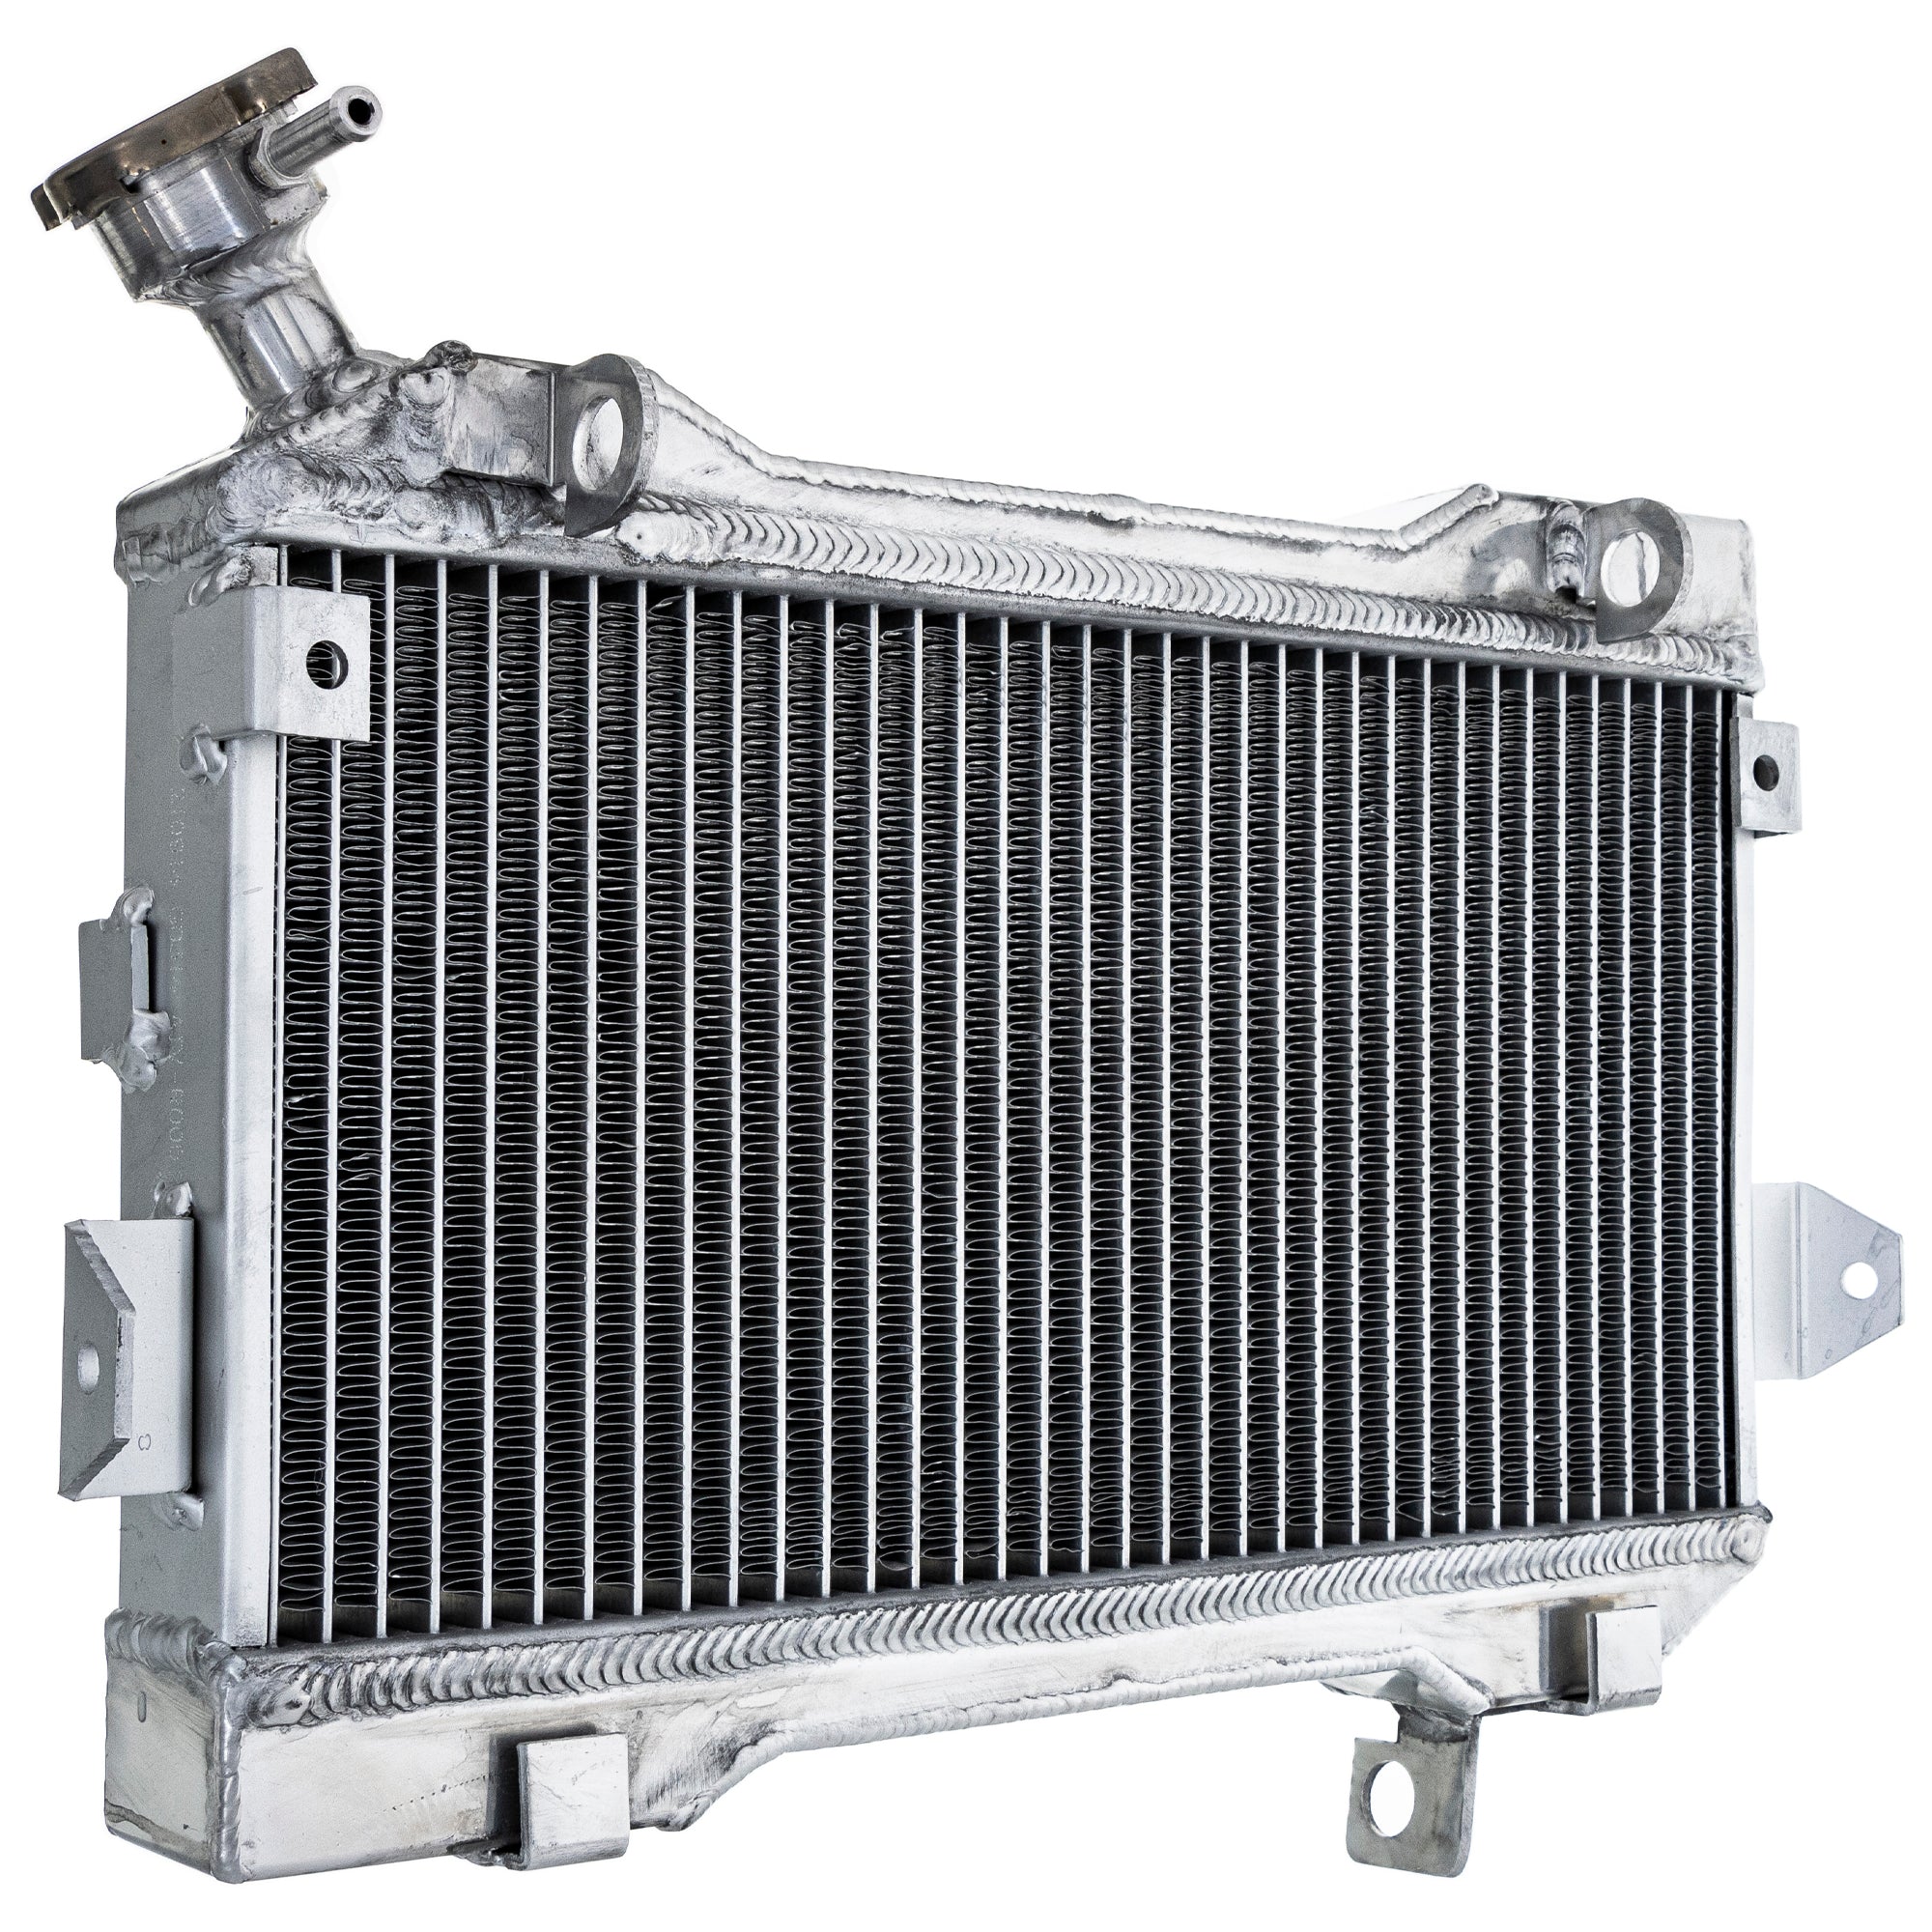 NICHE 519-CRD2238A High Capacity Radiator for zOTHER Quadracer